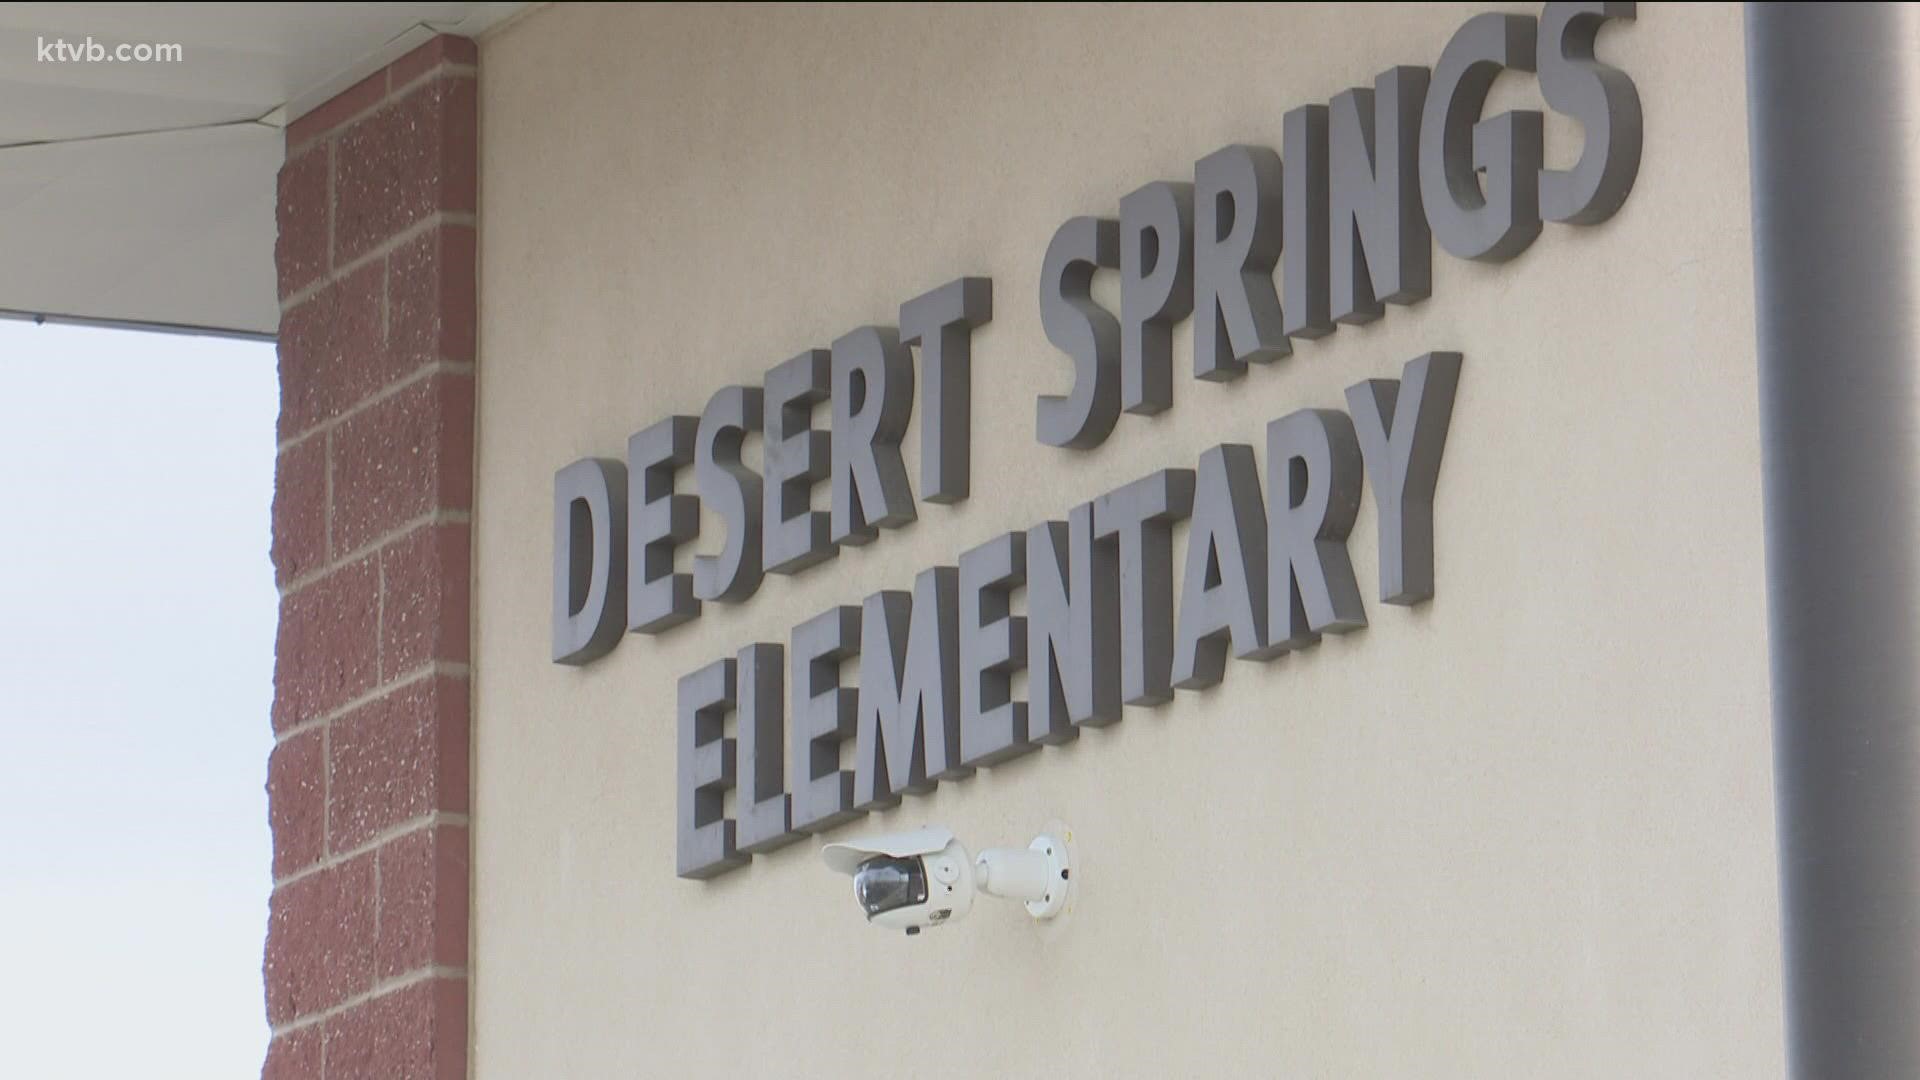 Four out of seven elementary schools are overflowing with students, according to Vallivue spokesperson Joey Palmer. It could be all seven in the near future.